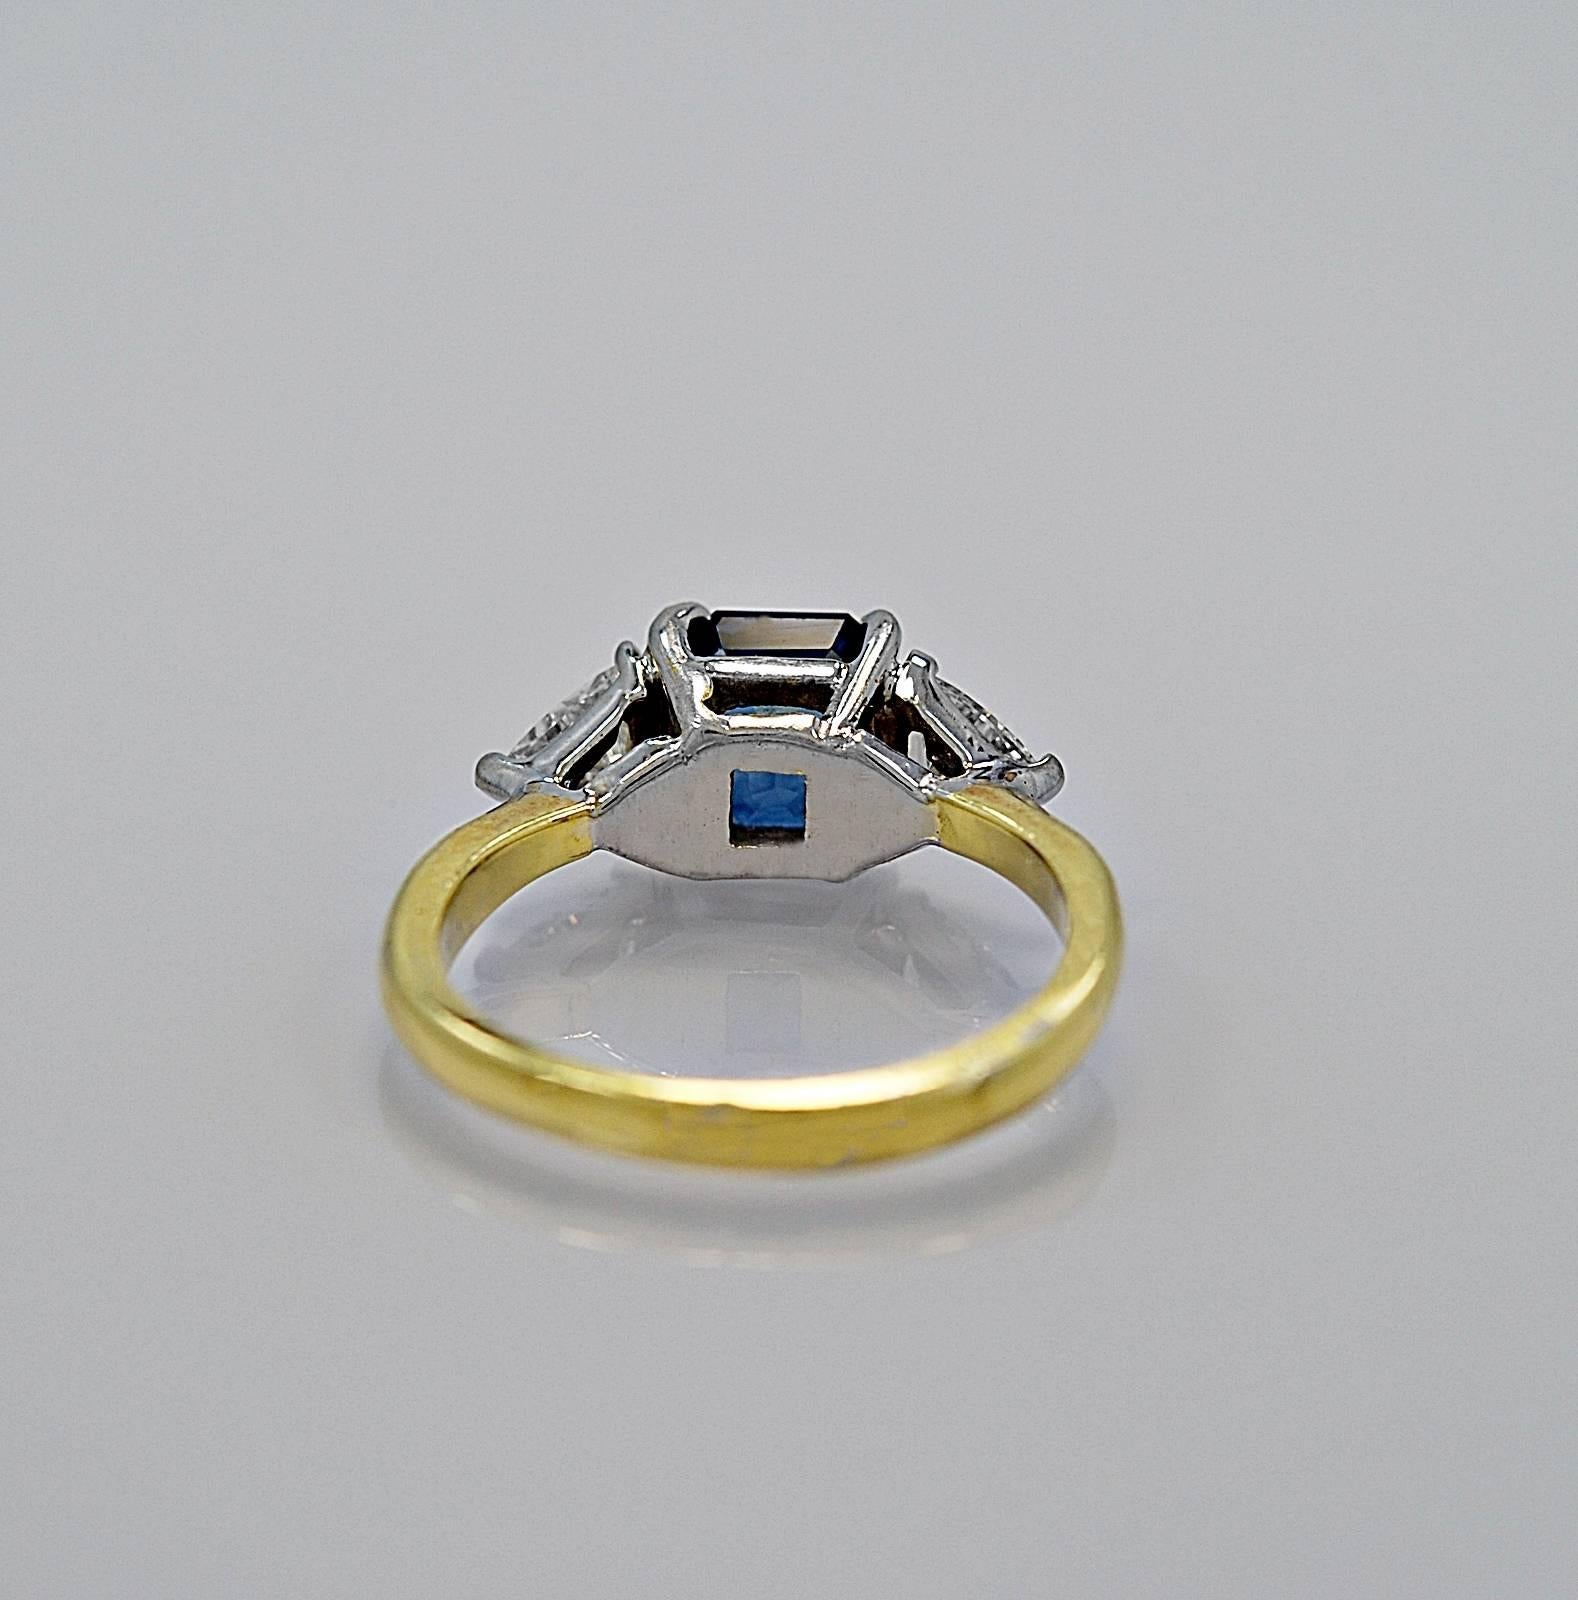 In our Tampa store this item has a retail price of $8,995.

A traditional 18K white/yellow gold sapphire & diamond ring, c. 1950's, features a 1.50ct. apx. medium blue sapphire and two trillion cut diamonds weighing .60ct. apx. each. The diamonds